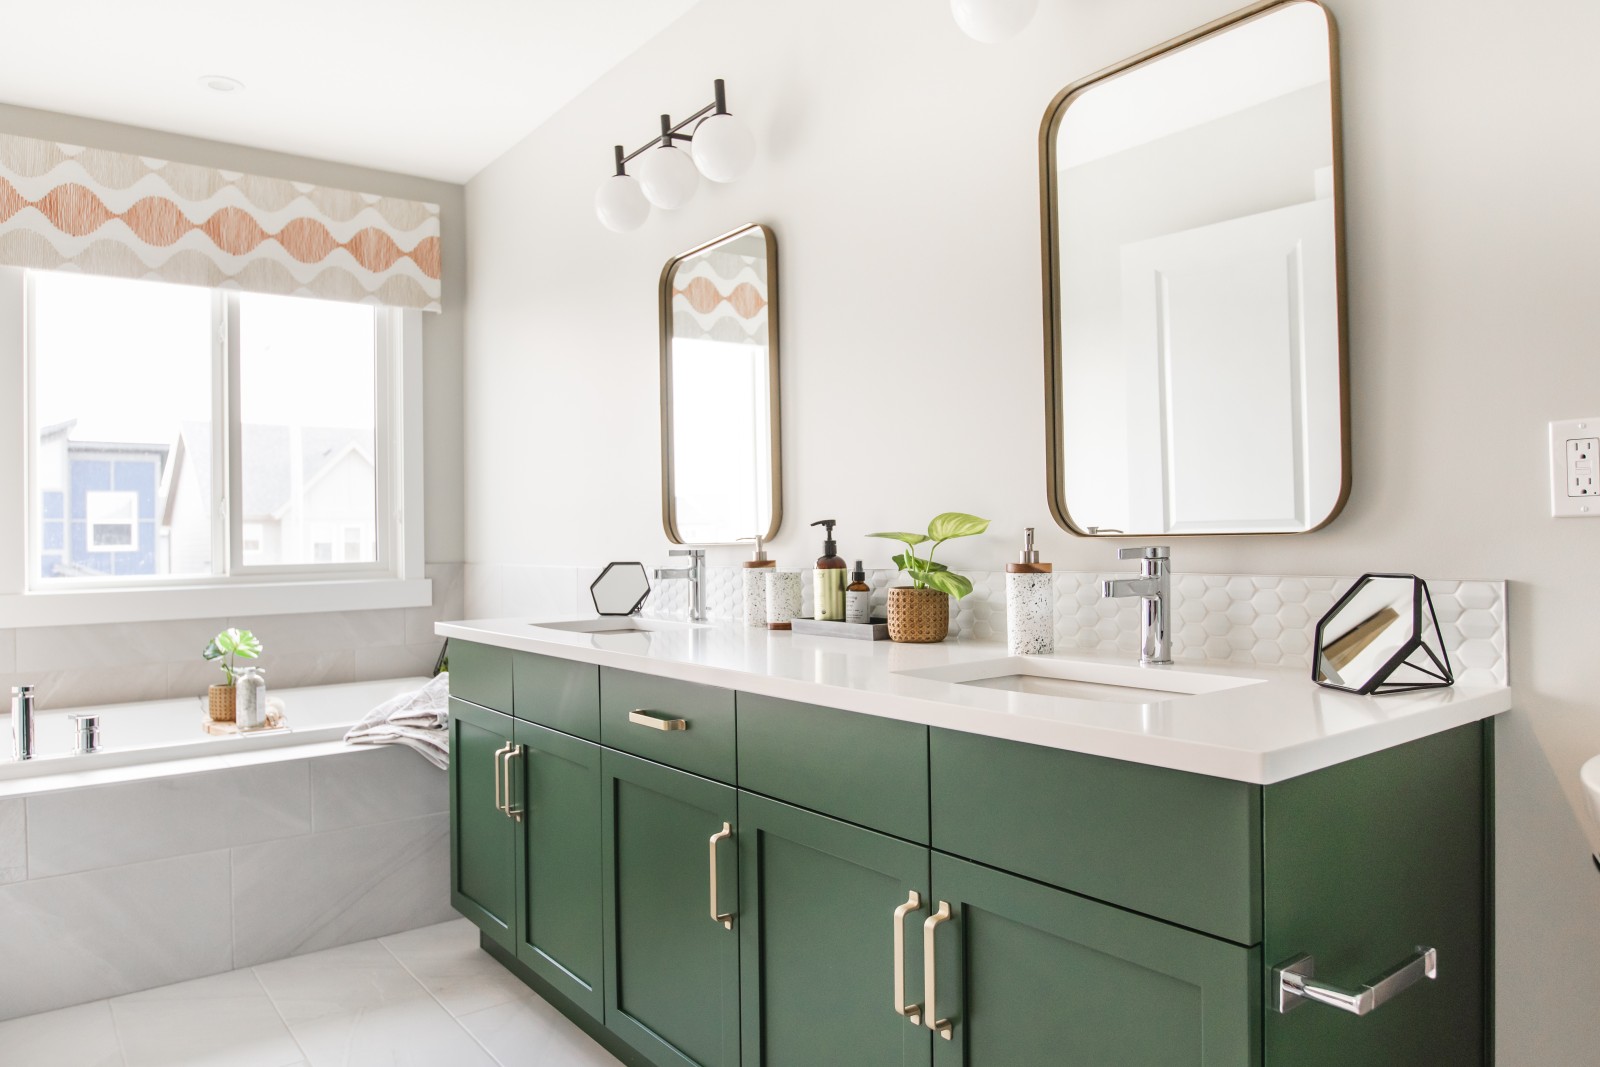 Rich green vanity of Bianca showhome accented with gold handles and gold mirrors